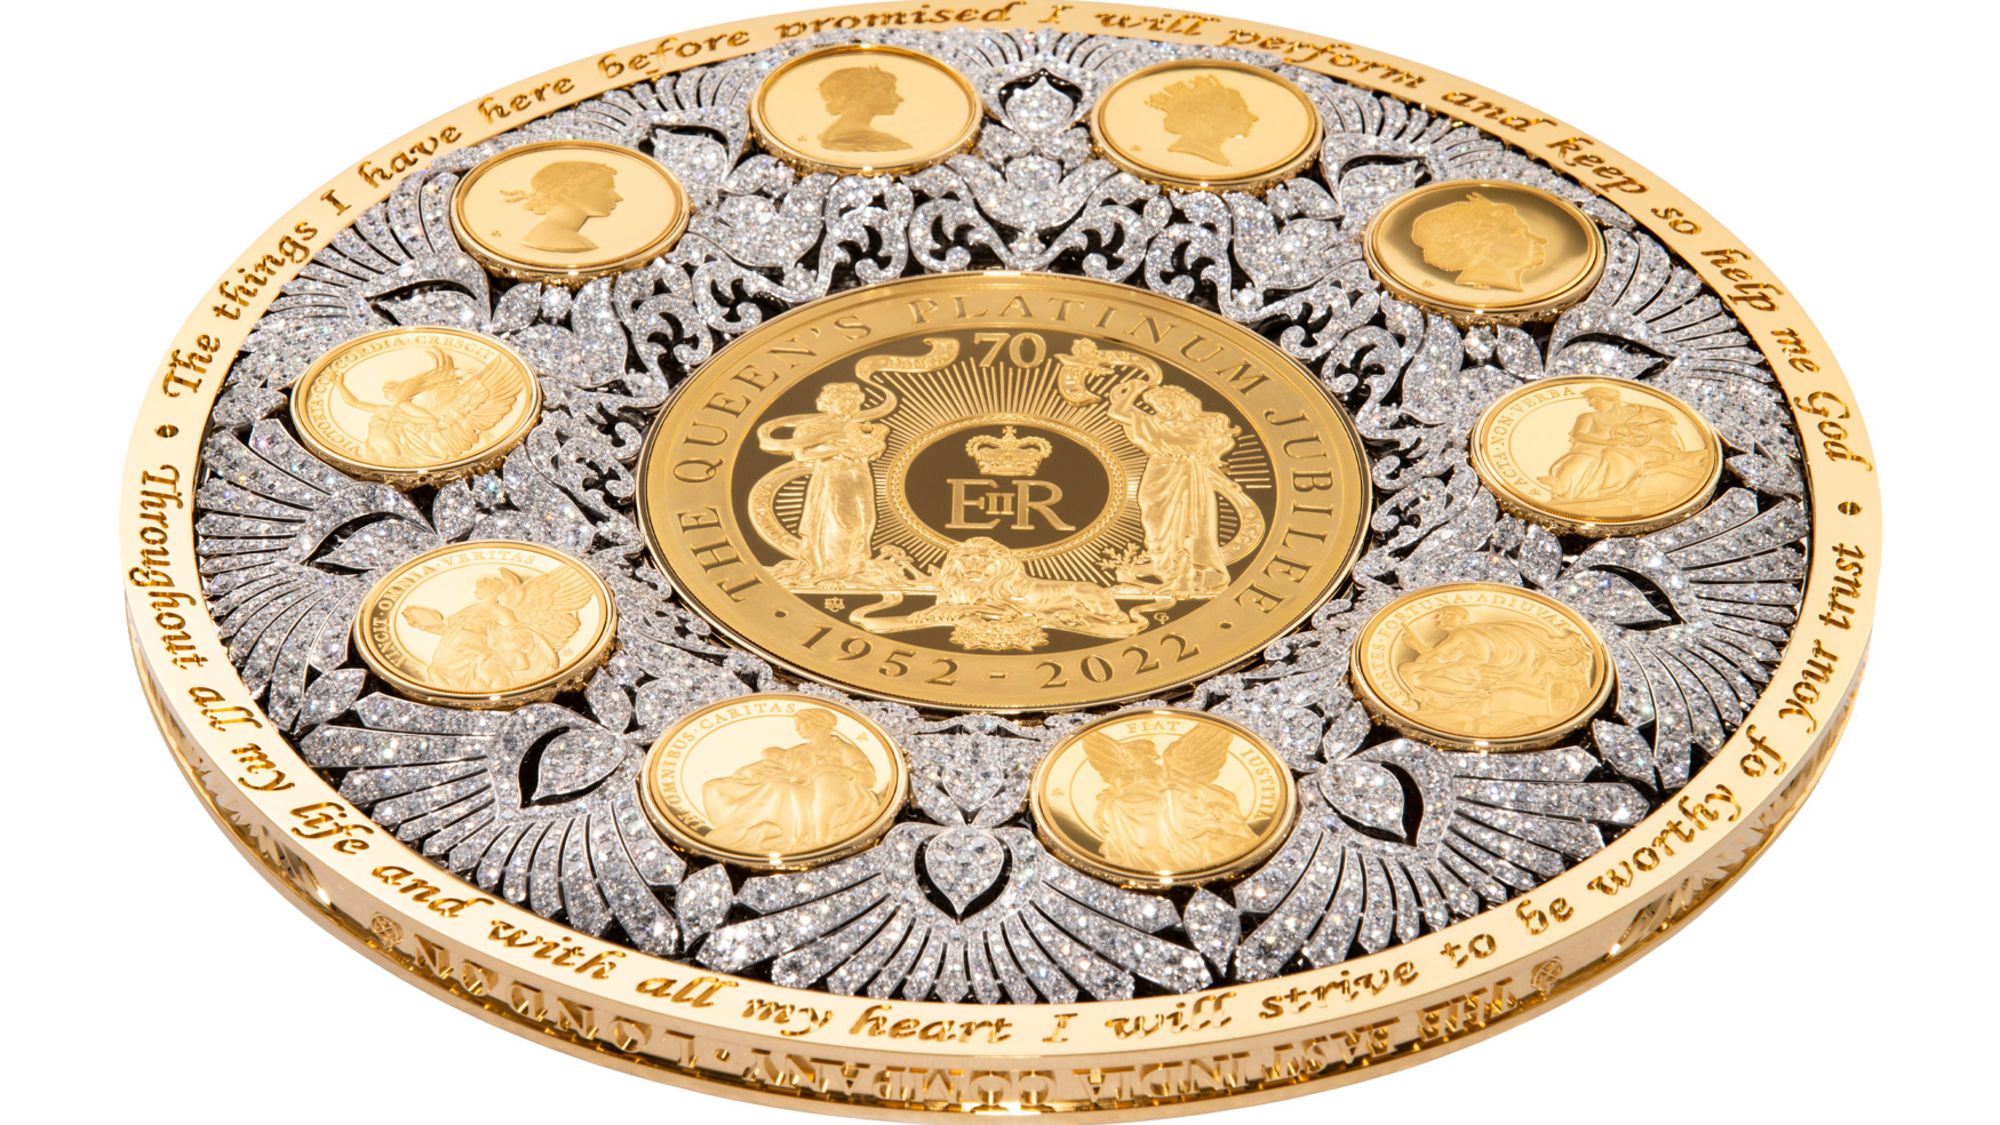 Basketball-sized gold coin worth 'around $23M' honors late Queen Elizabeth  II